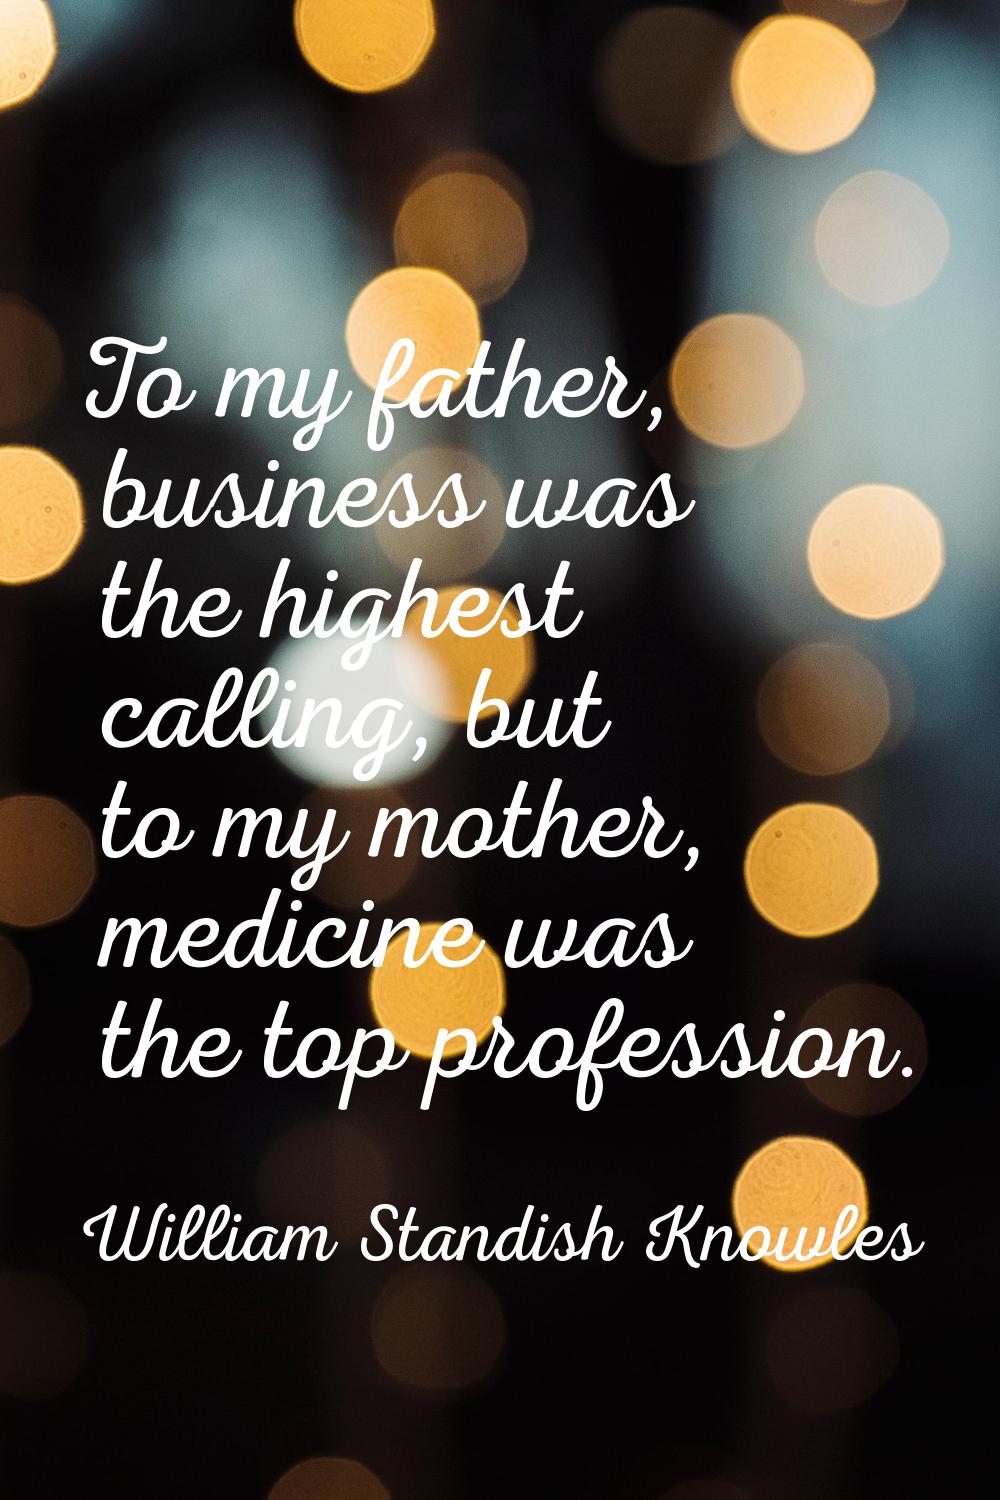 To my father, business was the highest calling, but to my mother, medicine was the top profession.